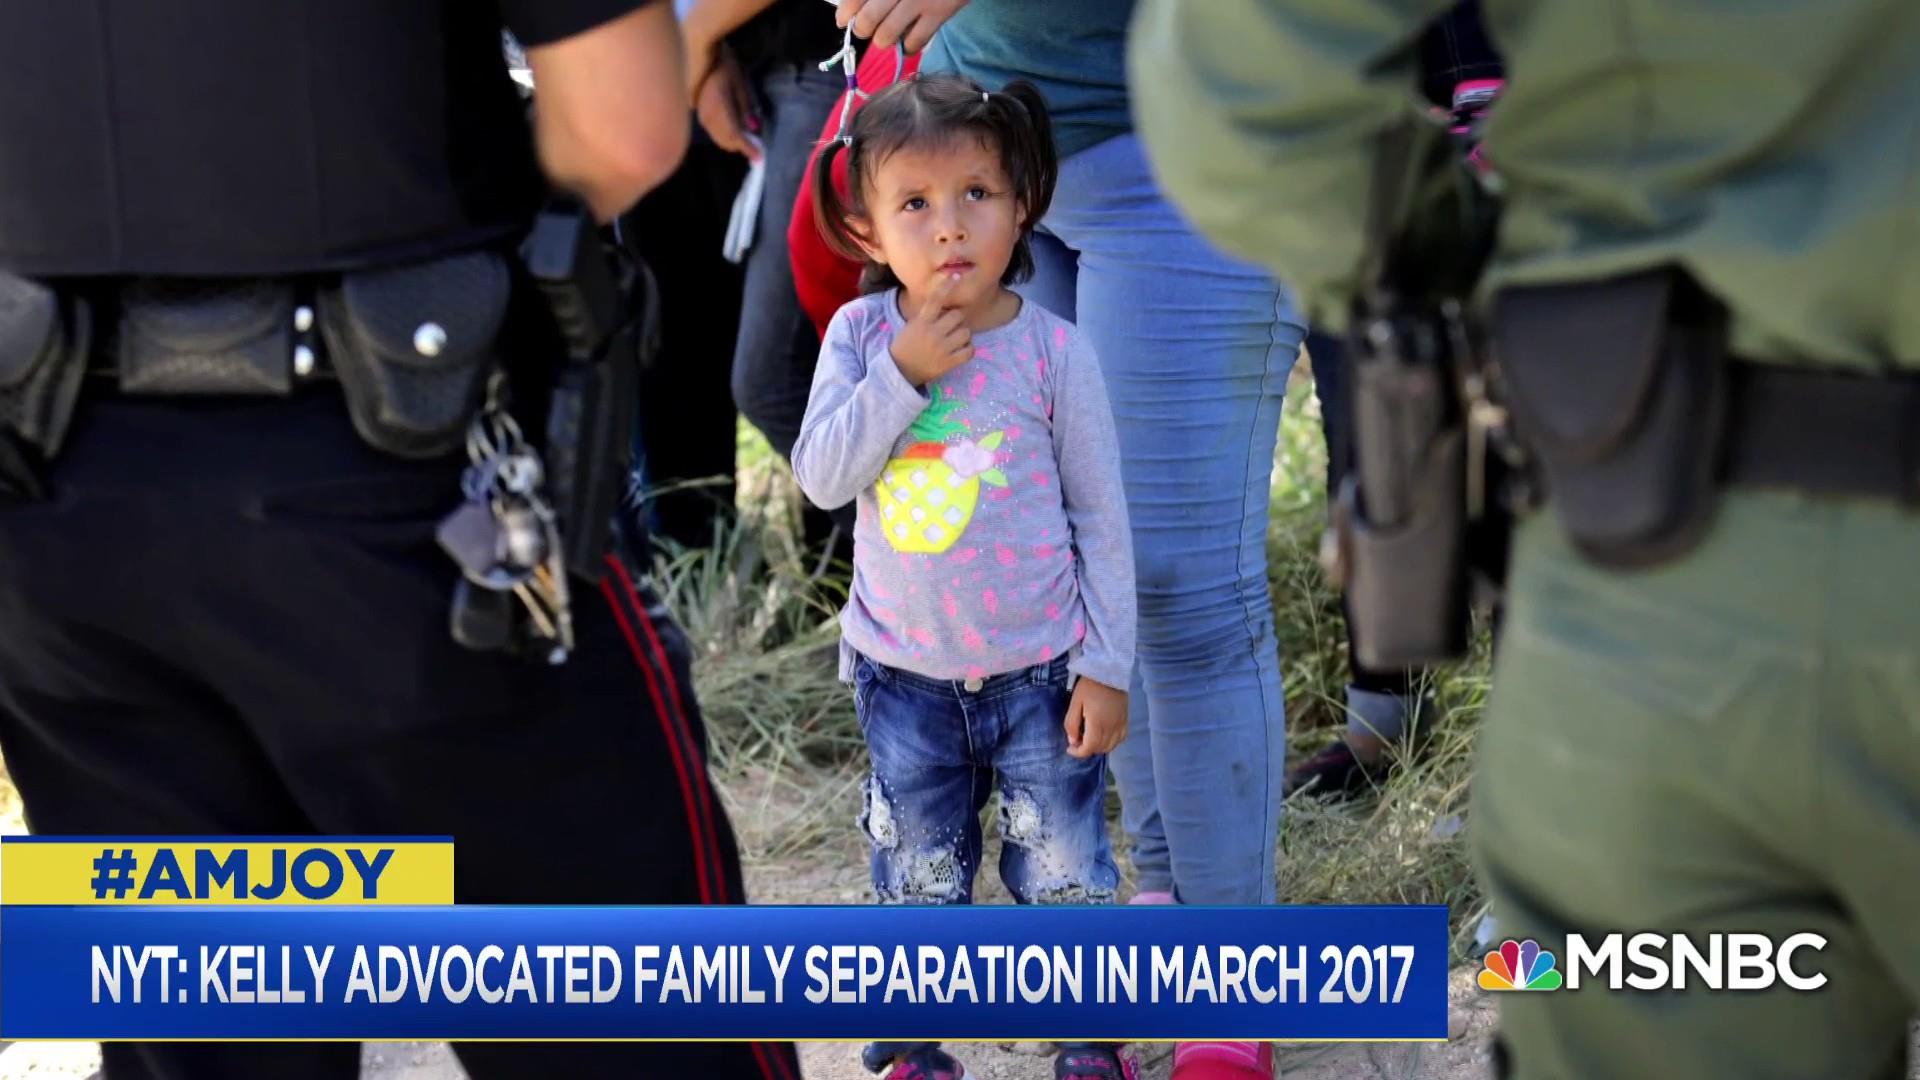 Nearly 2,000 children separated from parents at border1920 x 1080